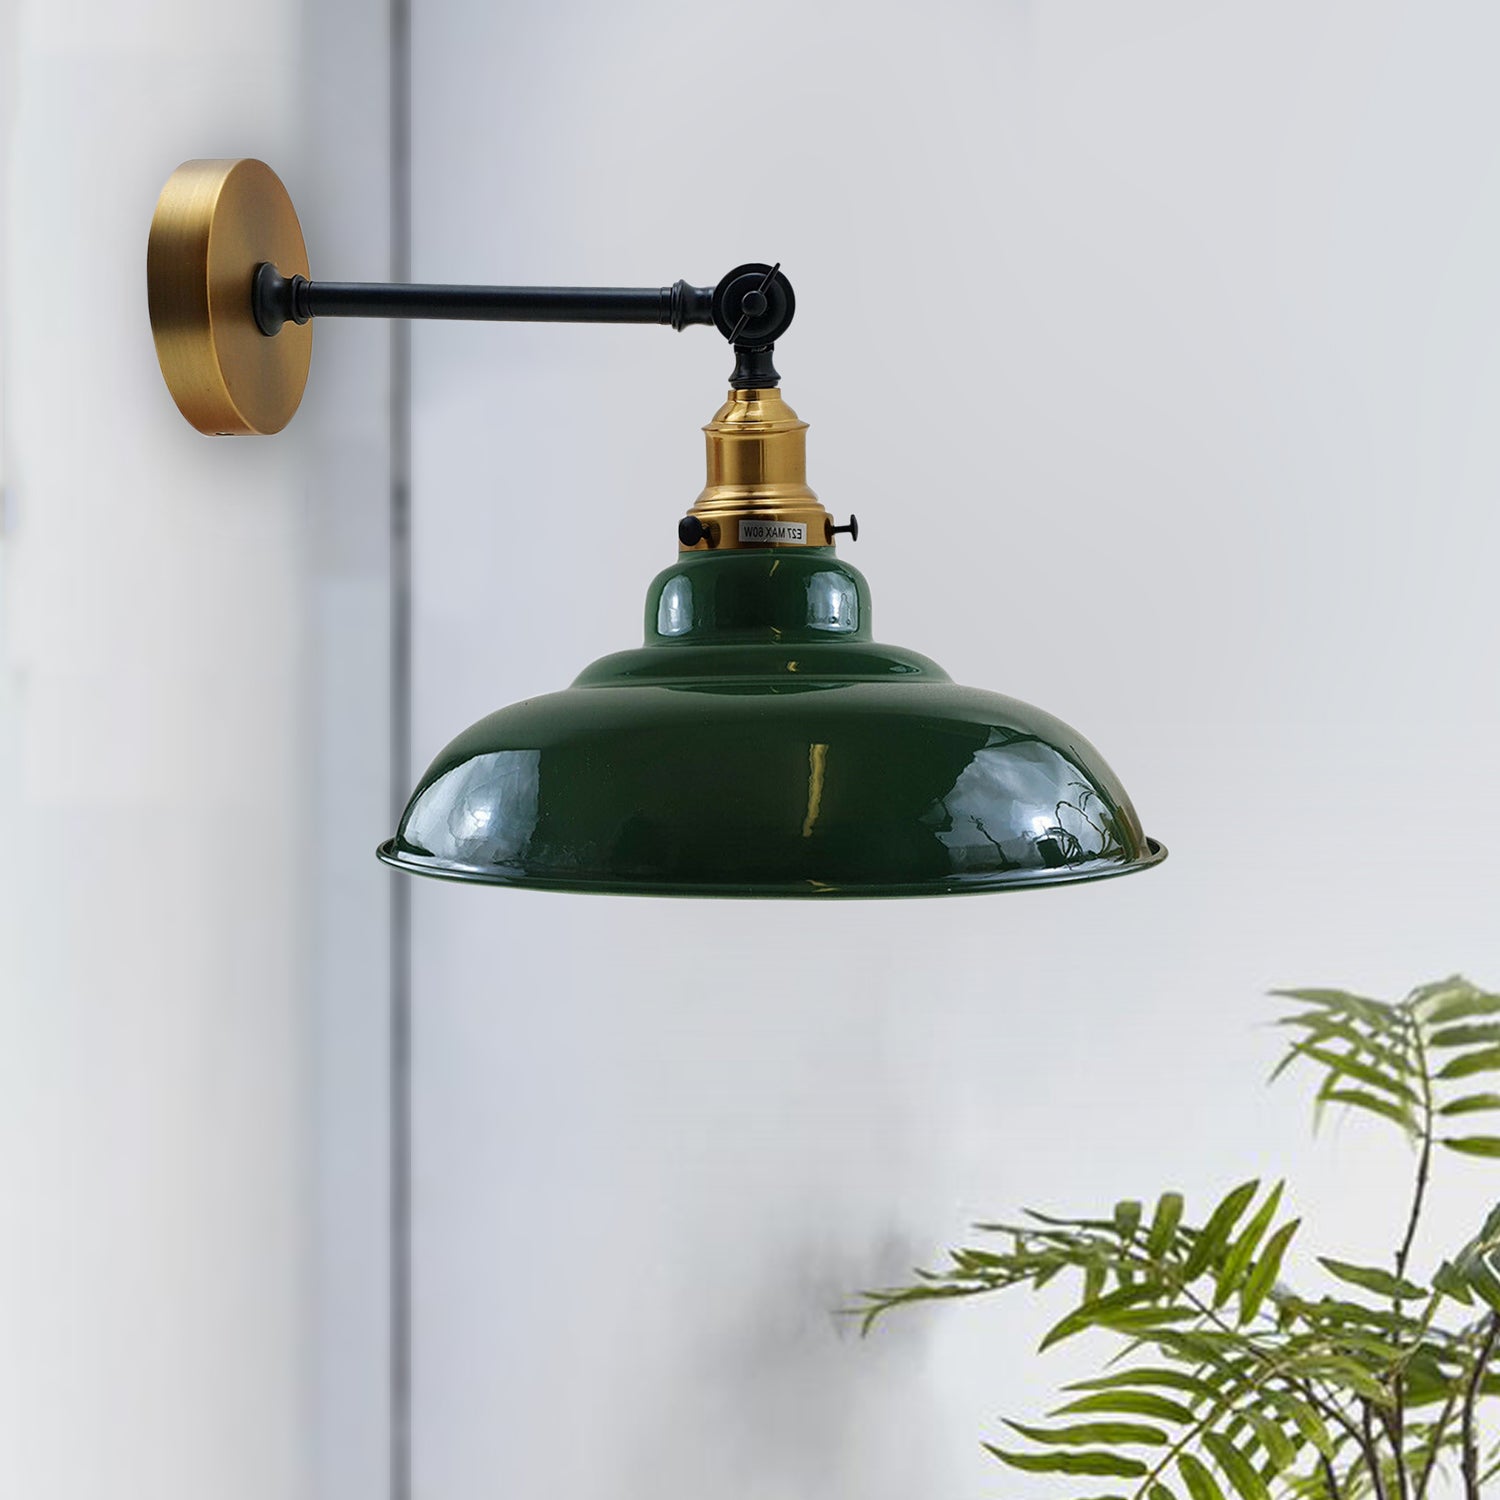 Green Shade With Adjustable Curvy Swing Arm Wall Light Fixture Loft Style Industrial Wall Sconce~3465 - LEDSone UK Ltd